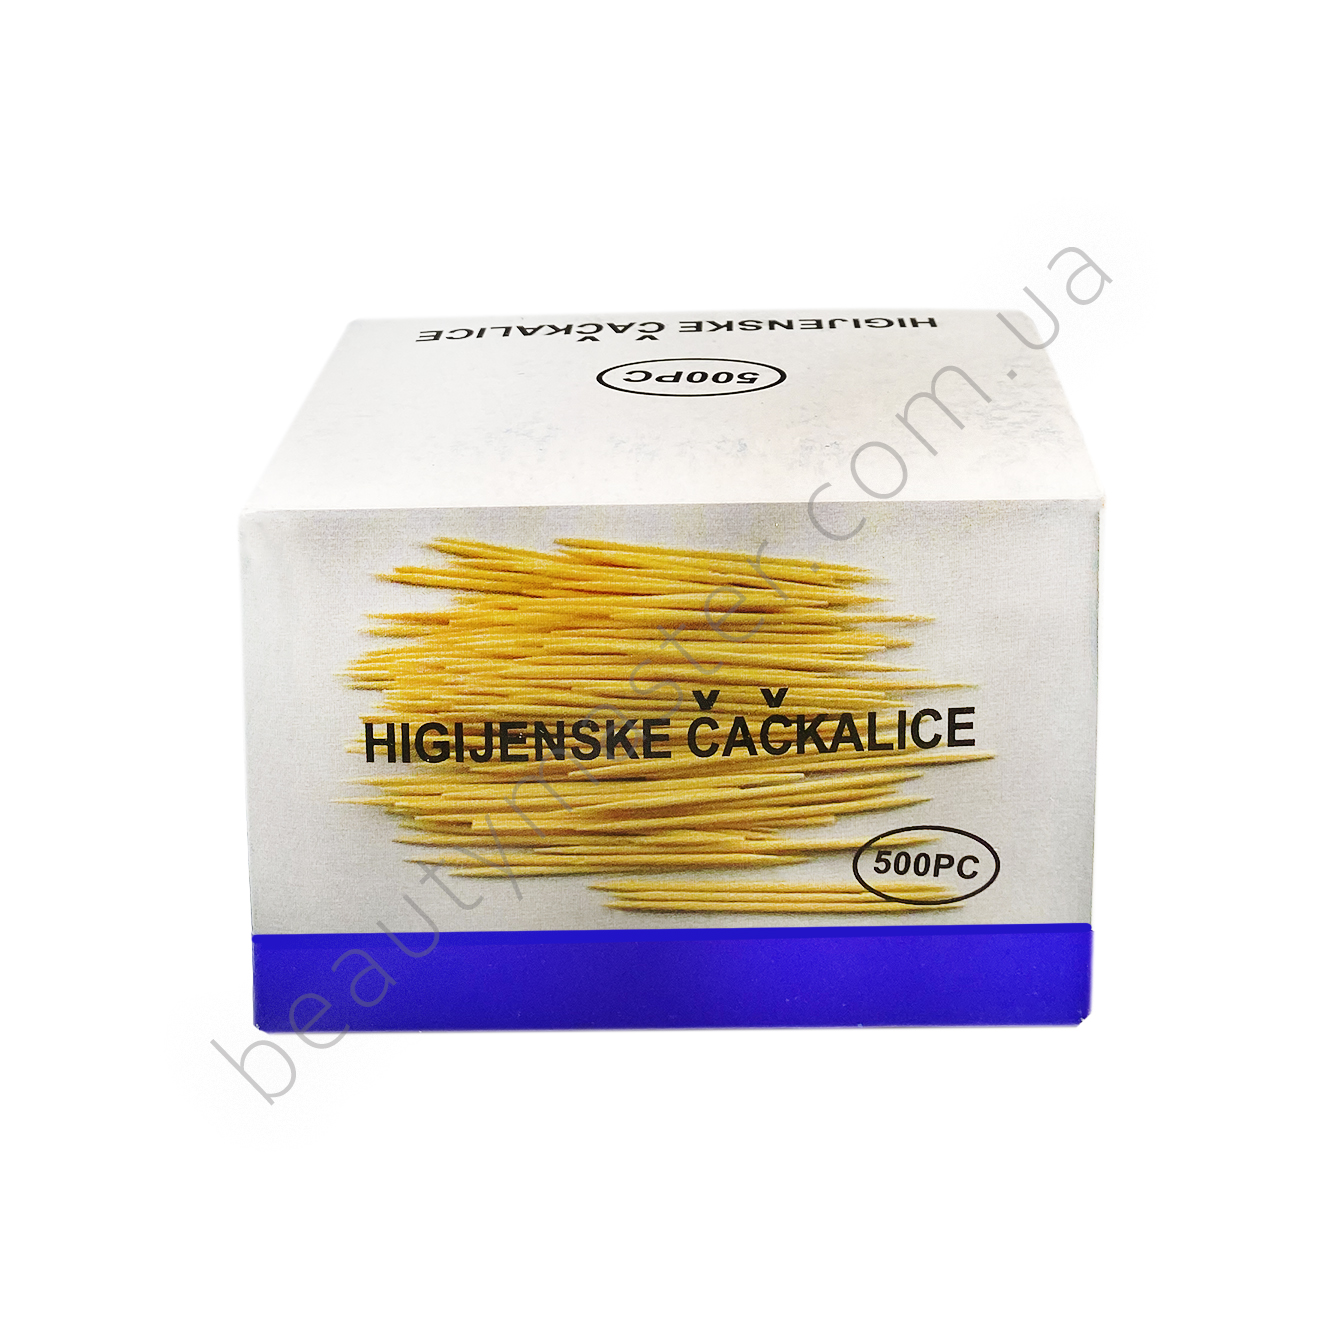 Toothpicks in individual packaging, 500 pcs